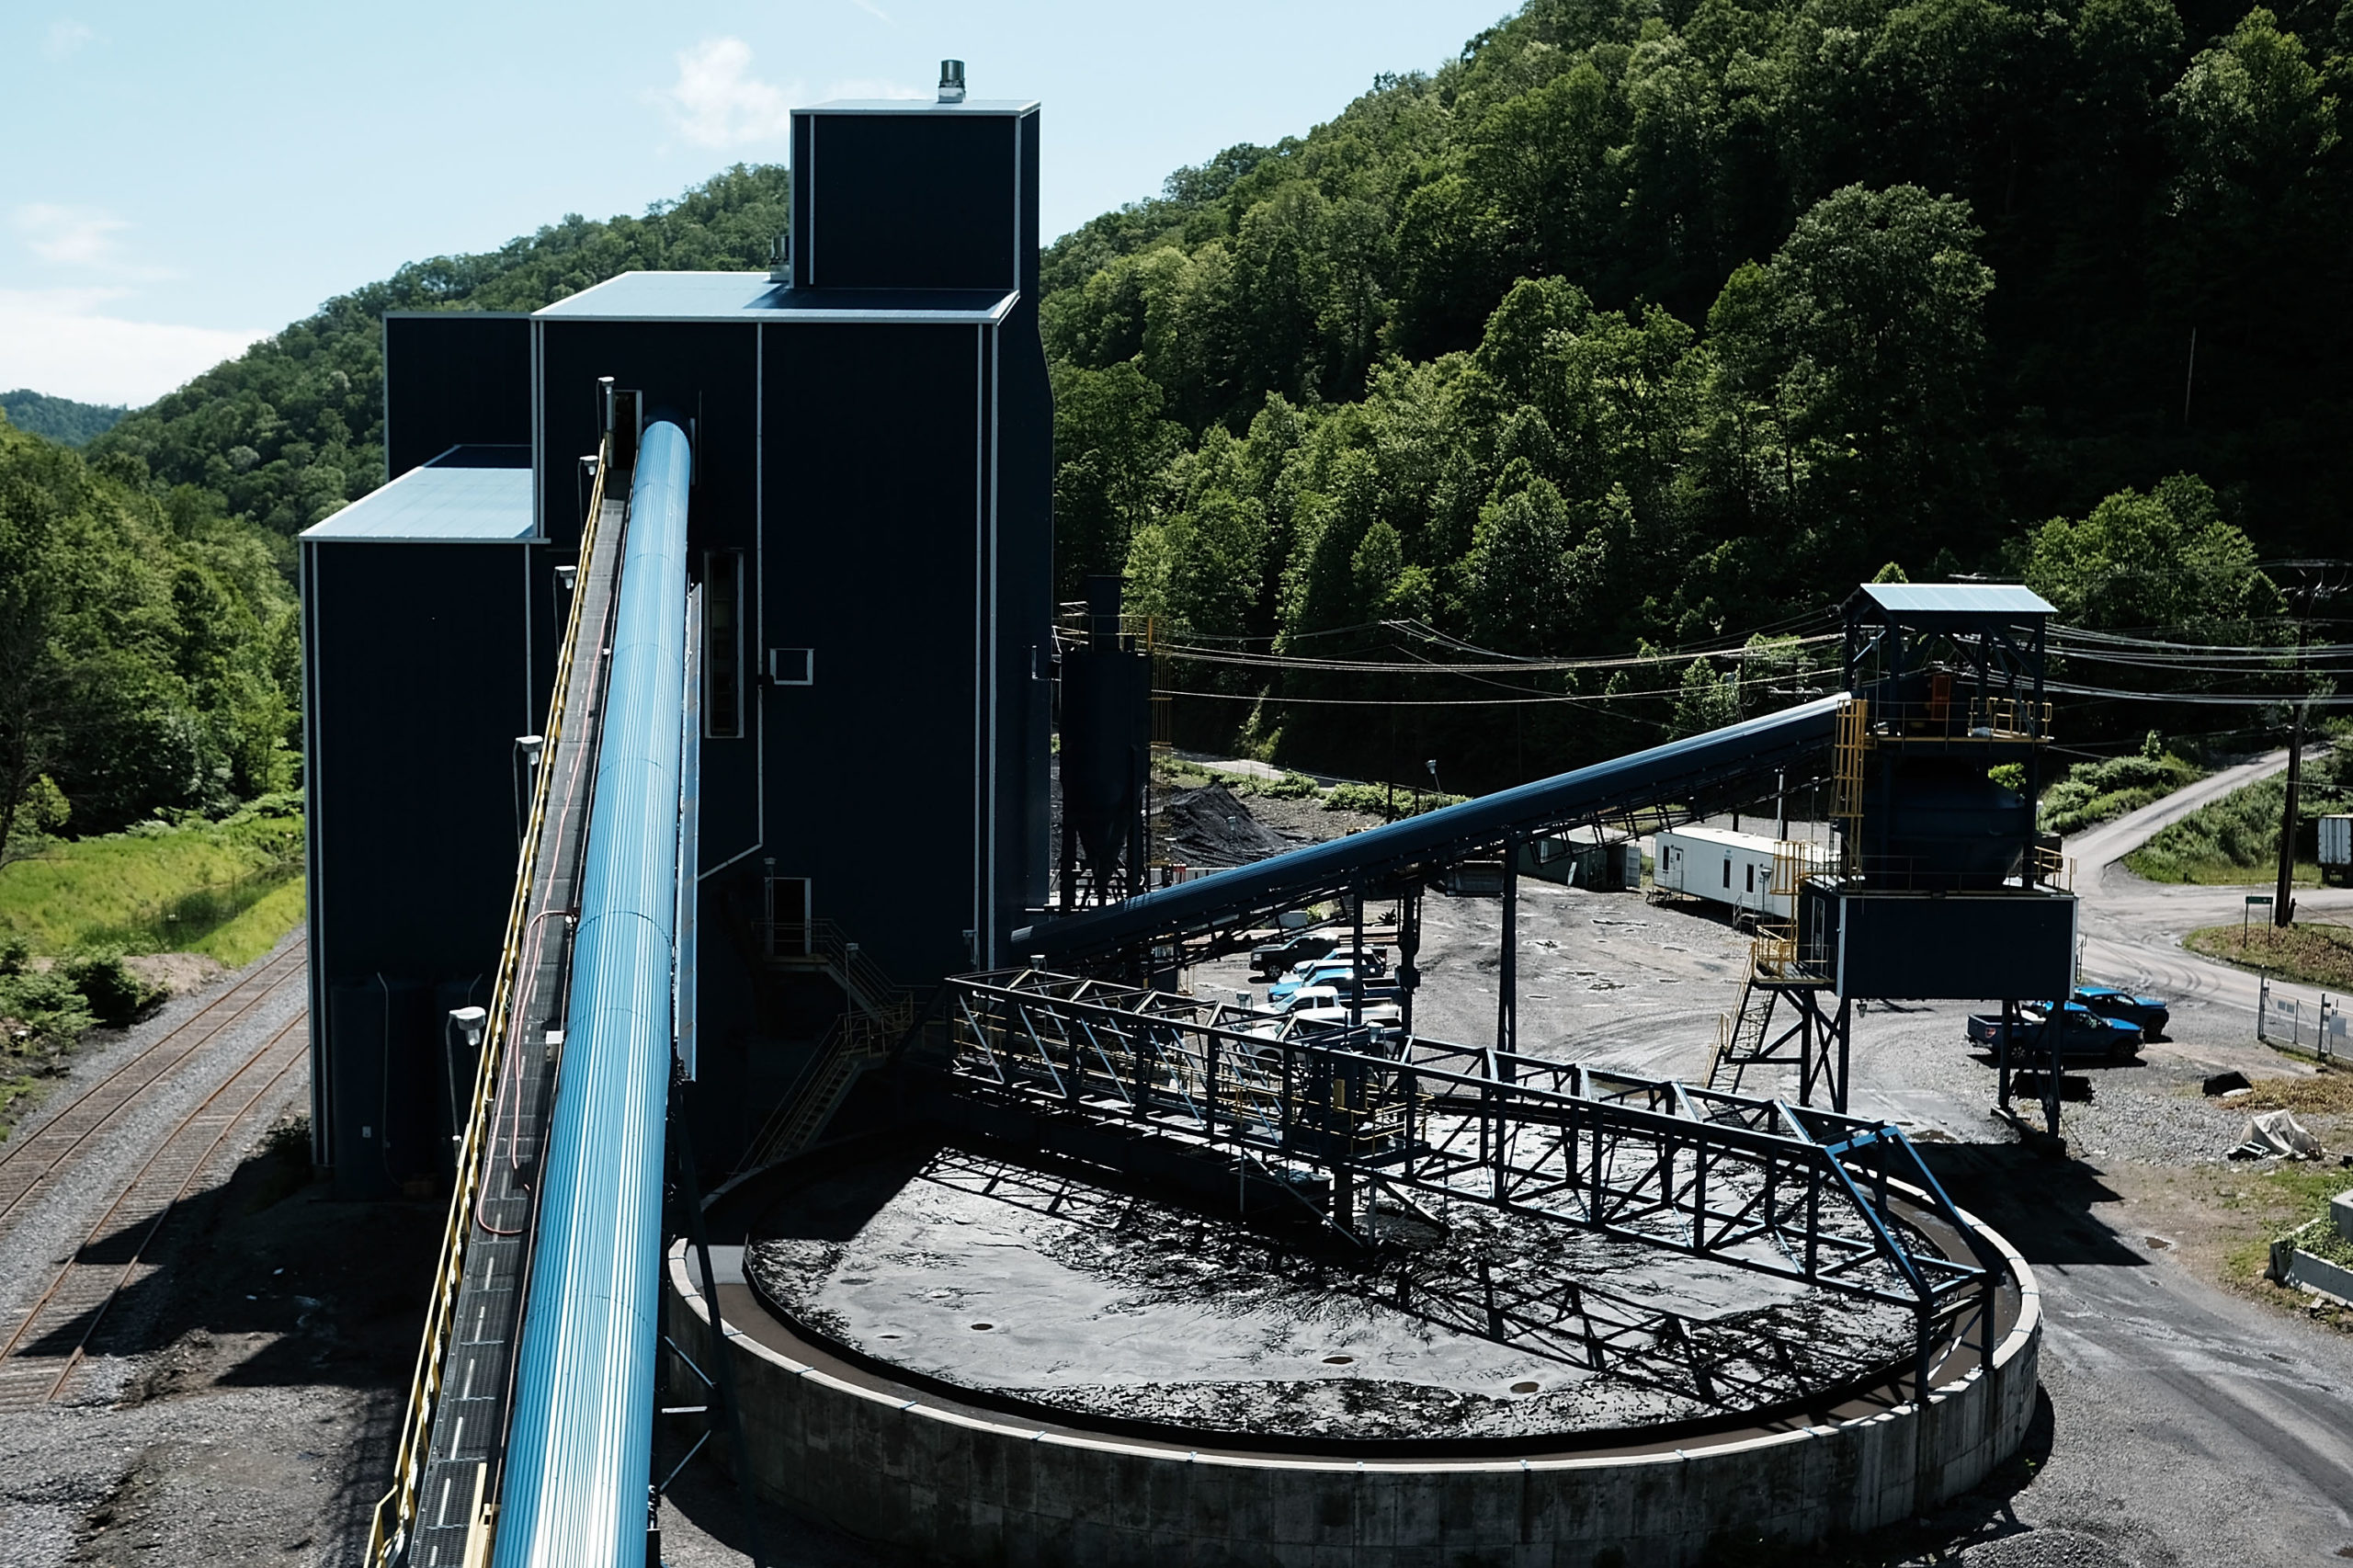 A coal prep plant outside the city of Welch in rural West Virginia. The state has struggled as coal has declined and the opioid epidemic took hold. (Spencer Platt/Getty Images)